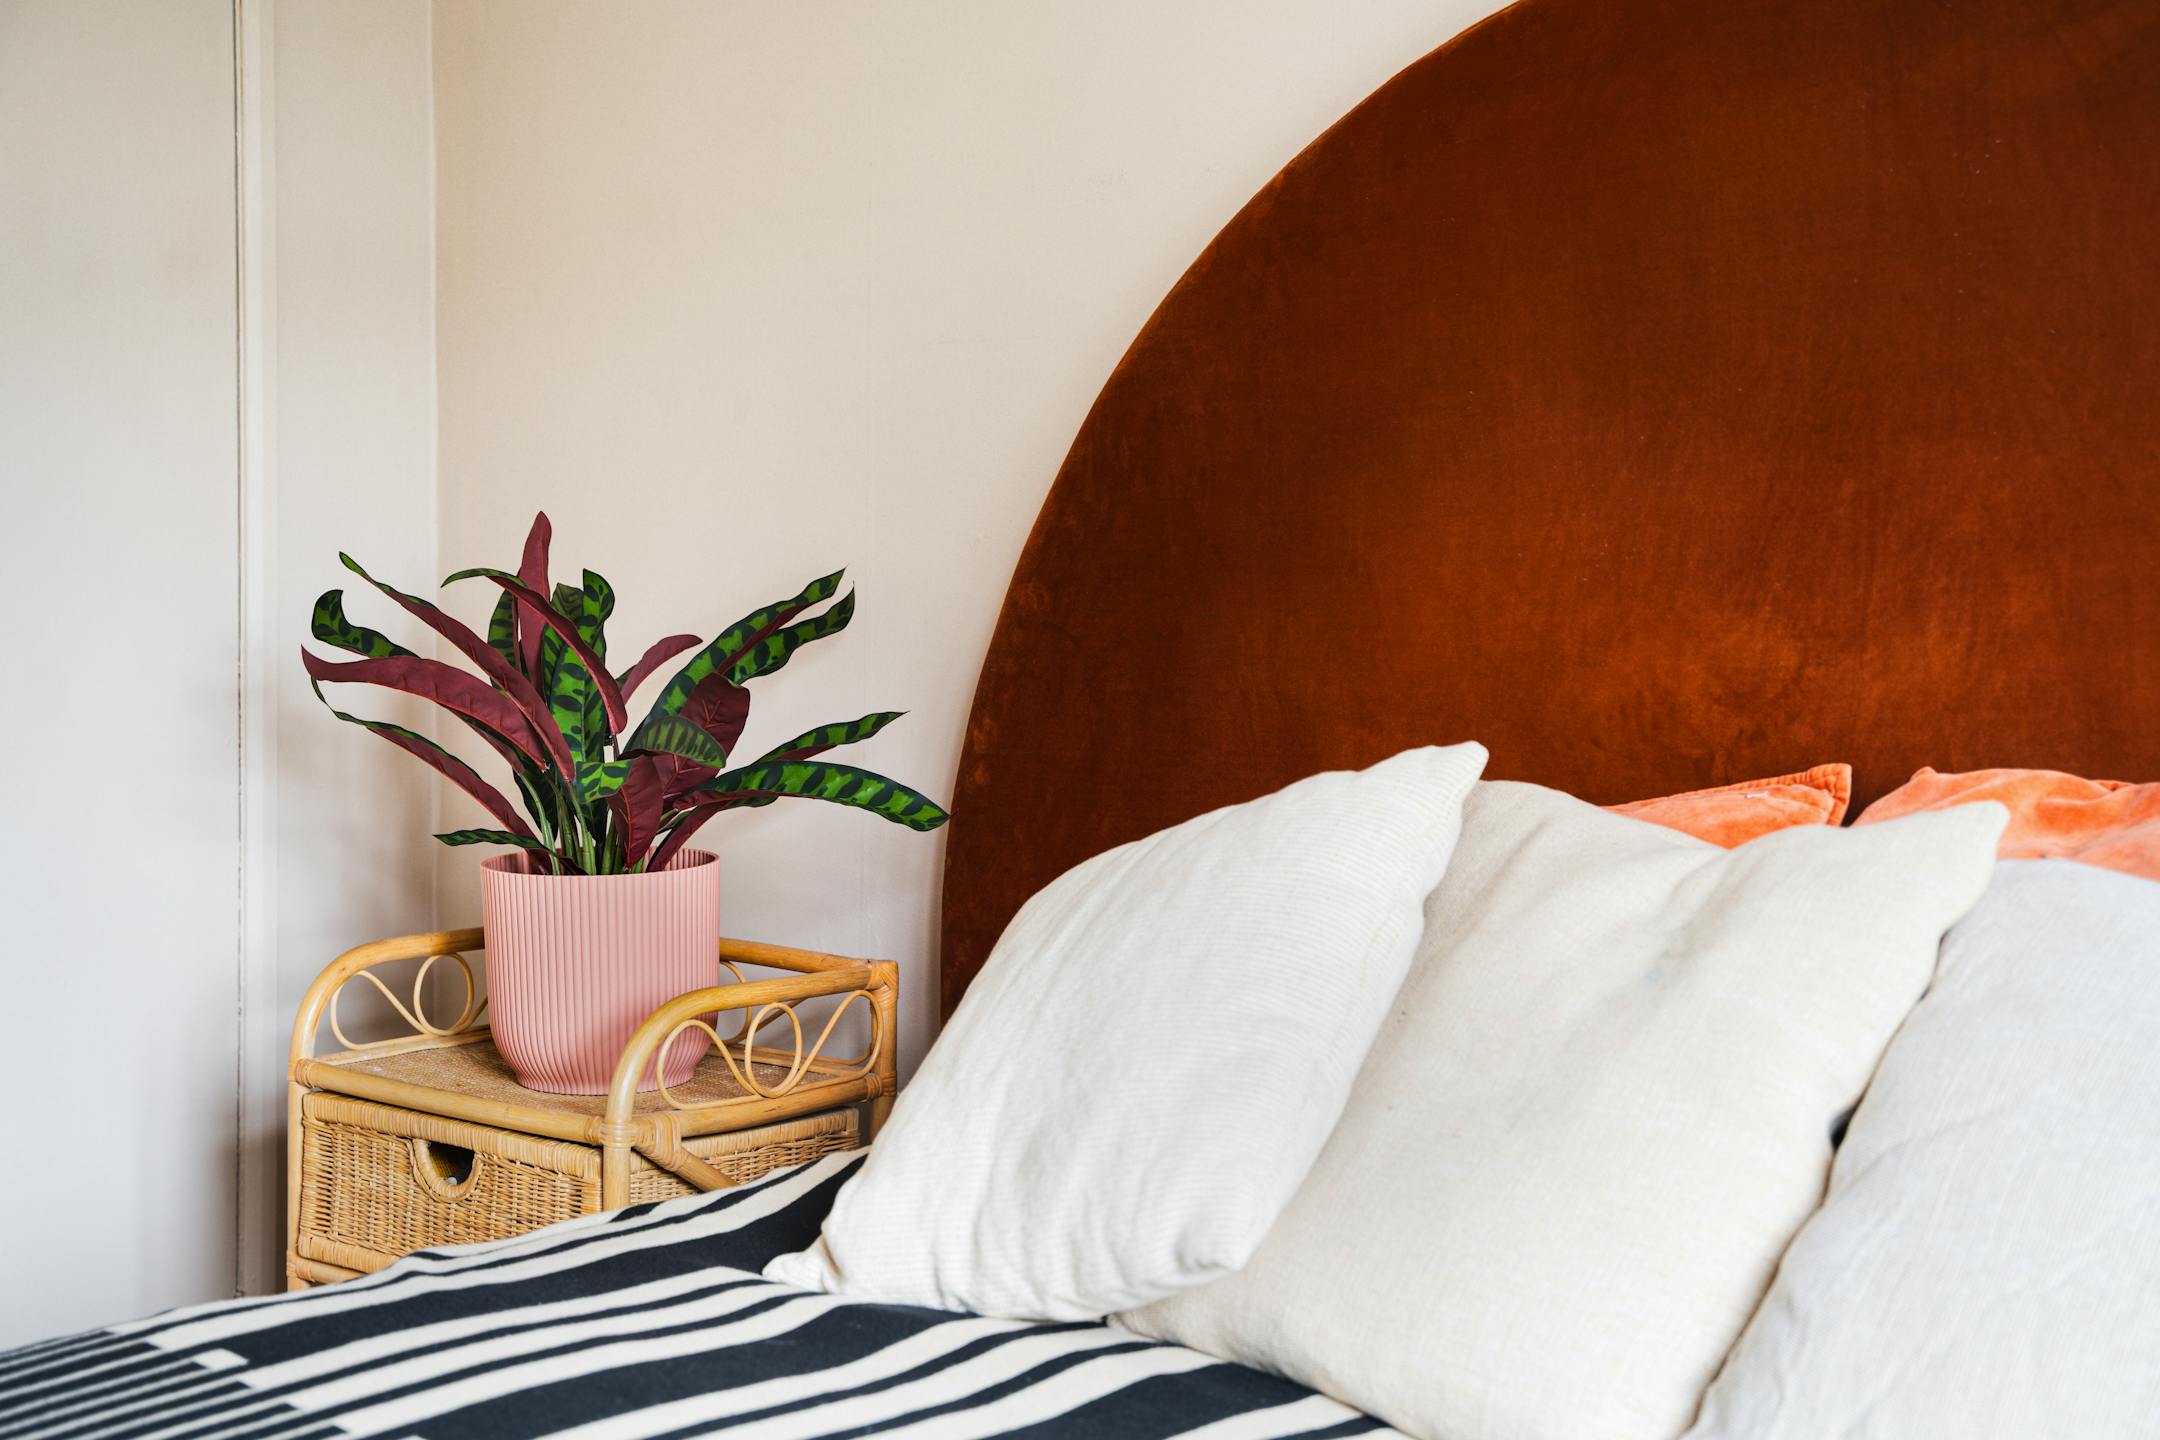 Faux rattlesnake calathea on rattan bedside table next to orange bed